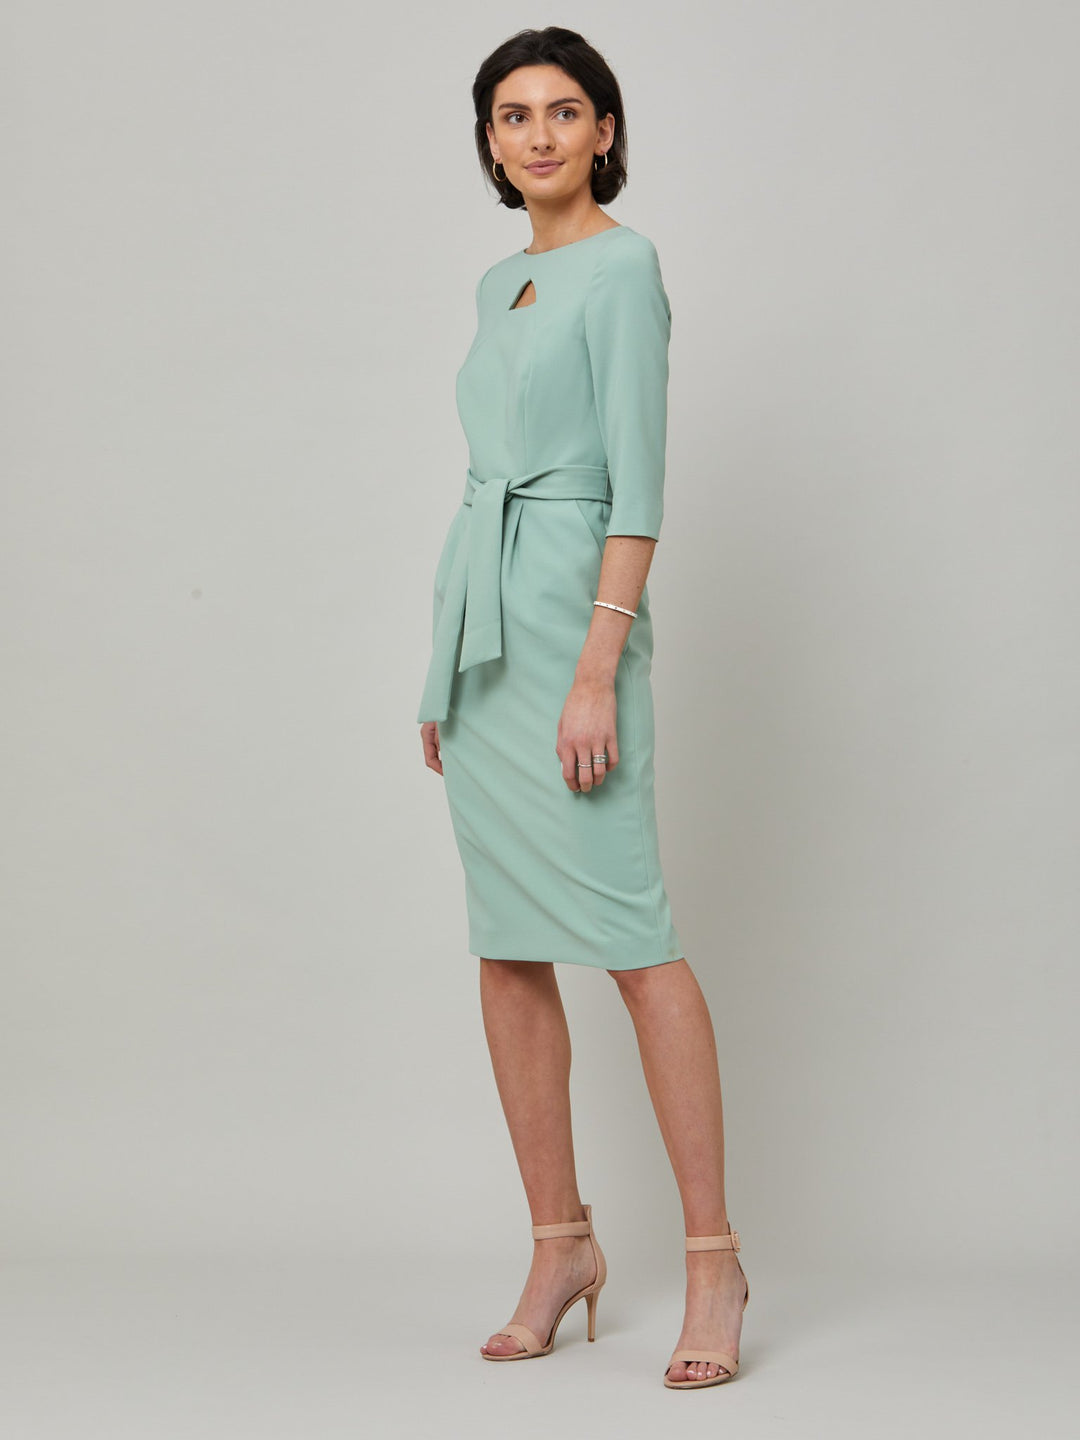 Beatrice is a fresh take on one of our key silhouettes. Features a statement diamond shape cut-out, belt and handy pockets. Crafted in our signature double crepe with a hint of stretch in willow green. Attending a summer wedding? Mother of the bride? Heading to the races? This is the dress for you.